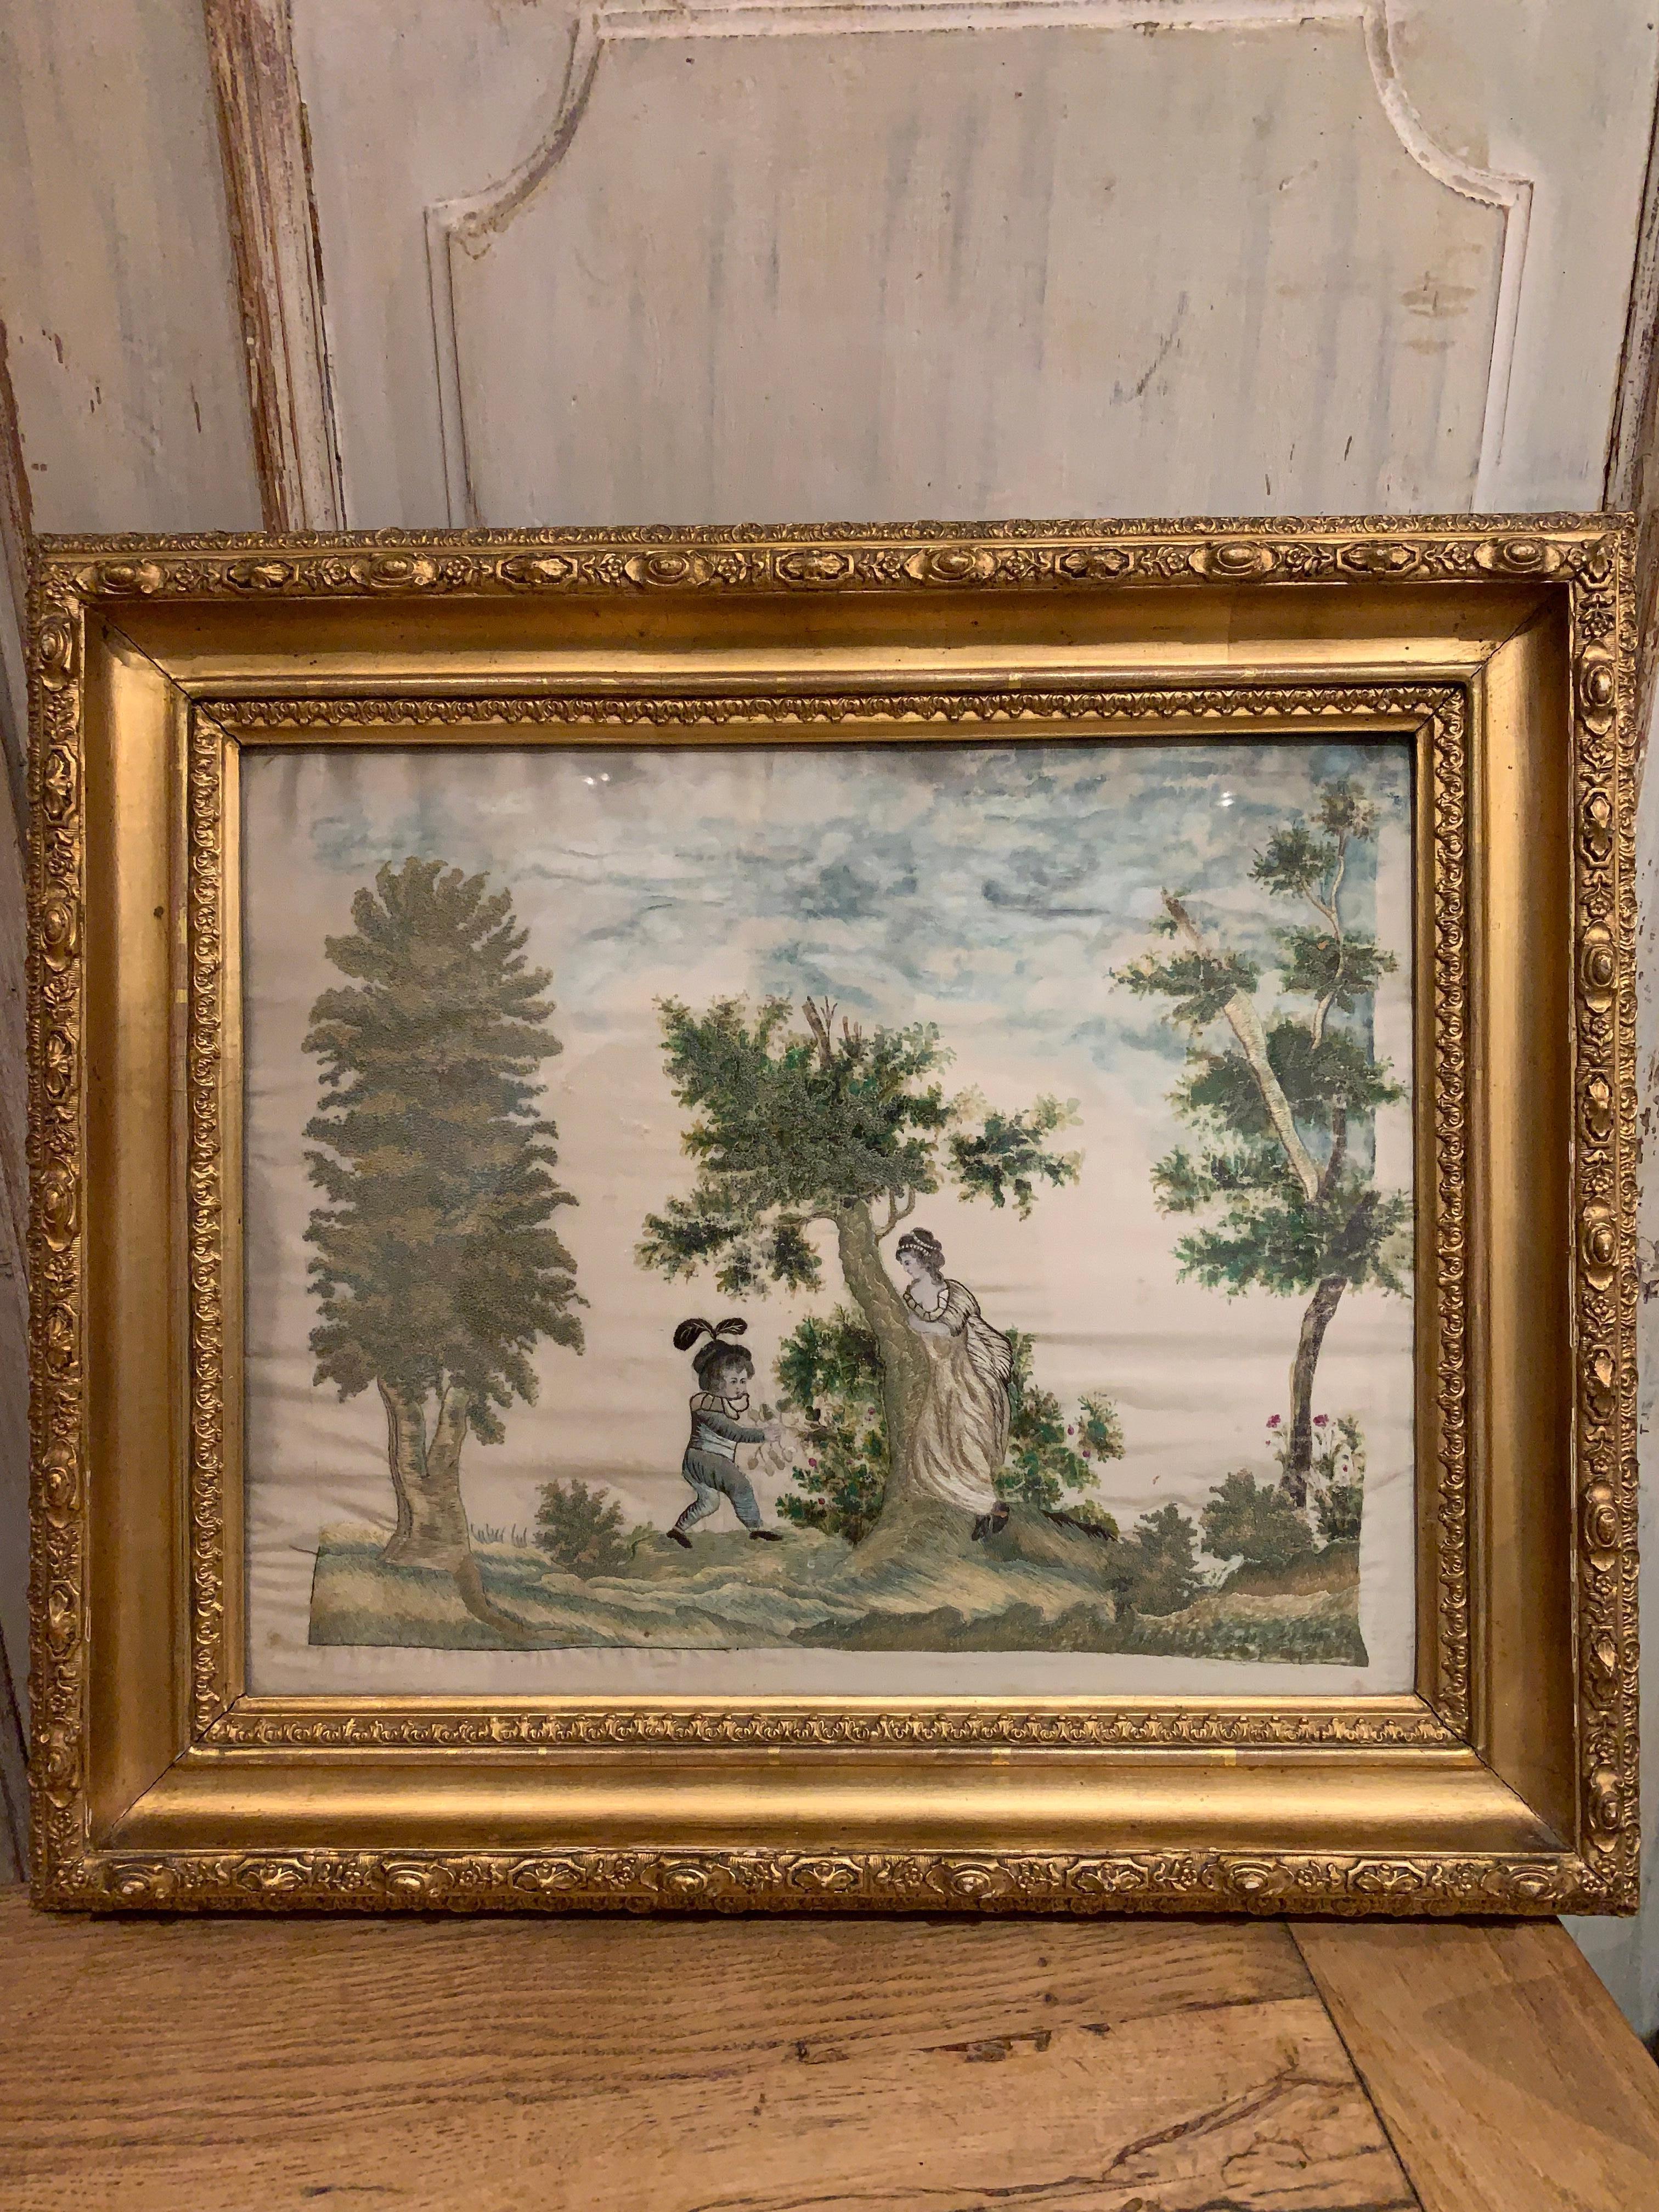 Charming early 19th century Scandinavian silk work of a child and mother in a woodland scene playing and berry picking.
Later framed in a gold frame. The silk work is in good condition and depicts a young boy in a pale blue suit wearing a hat with